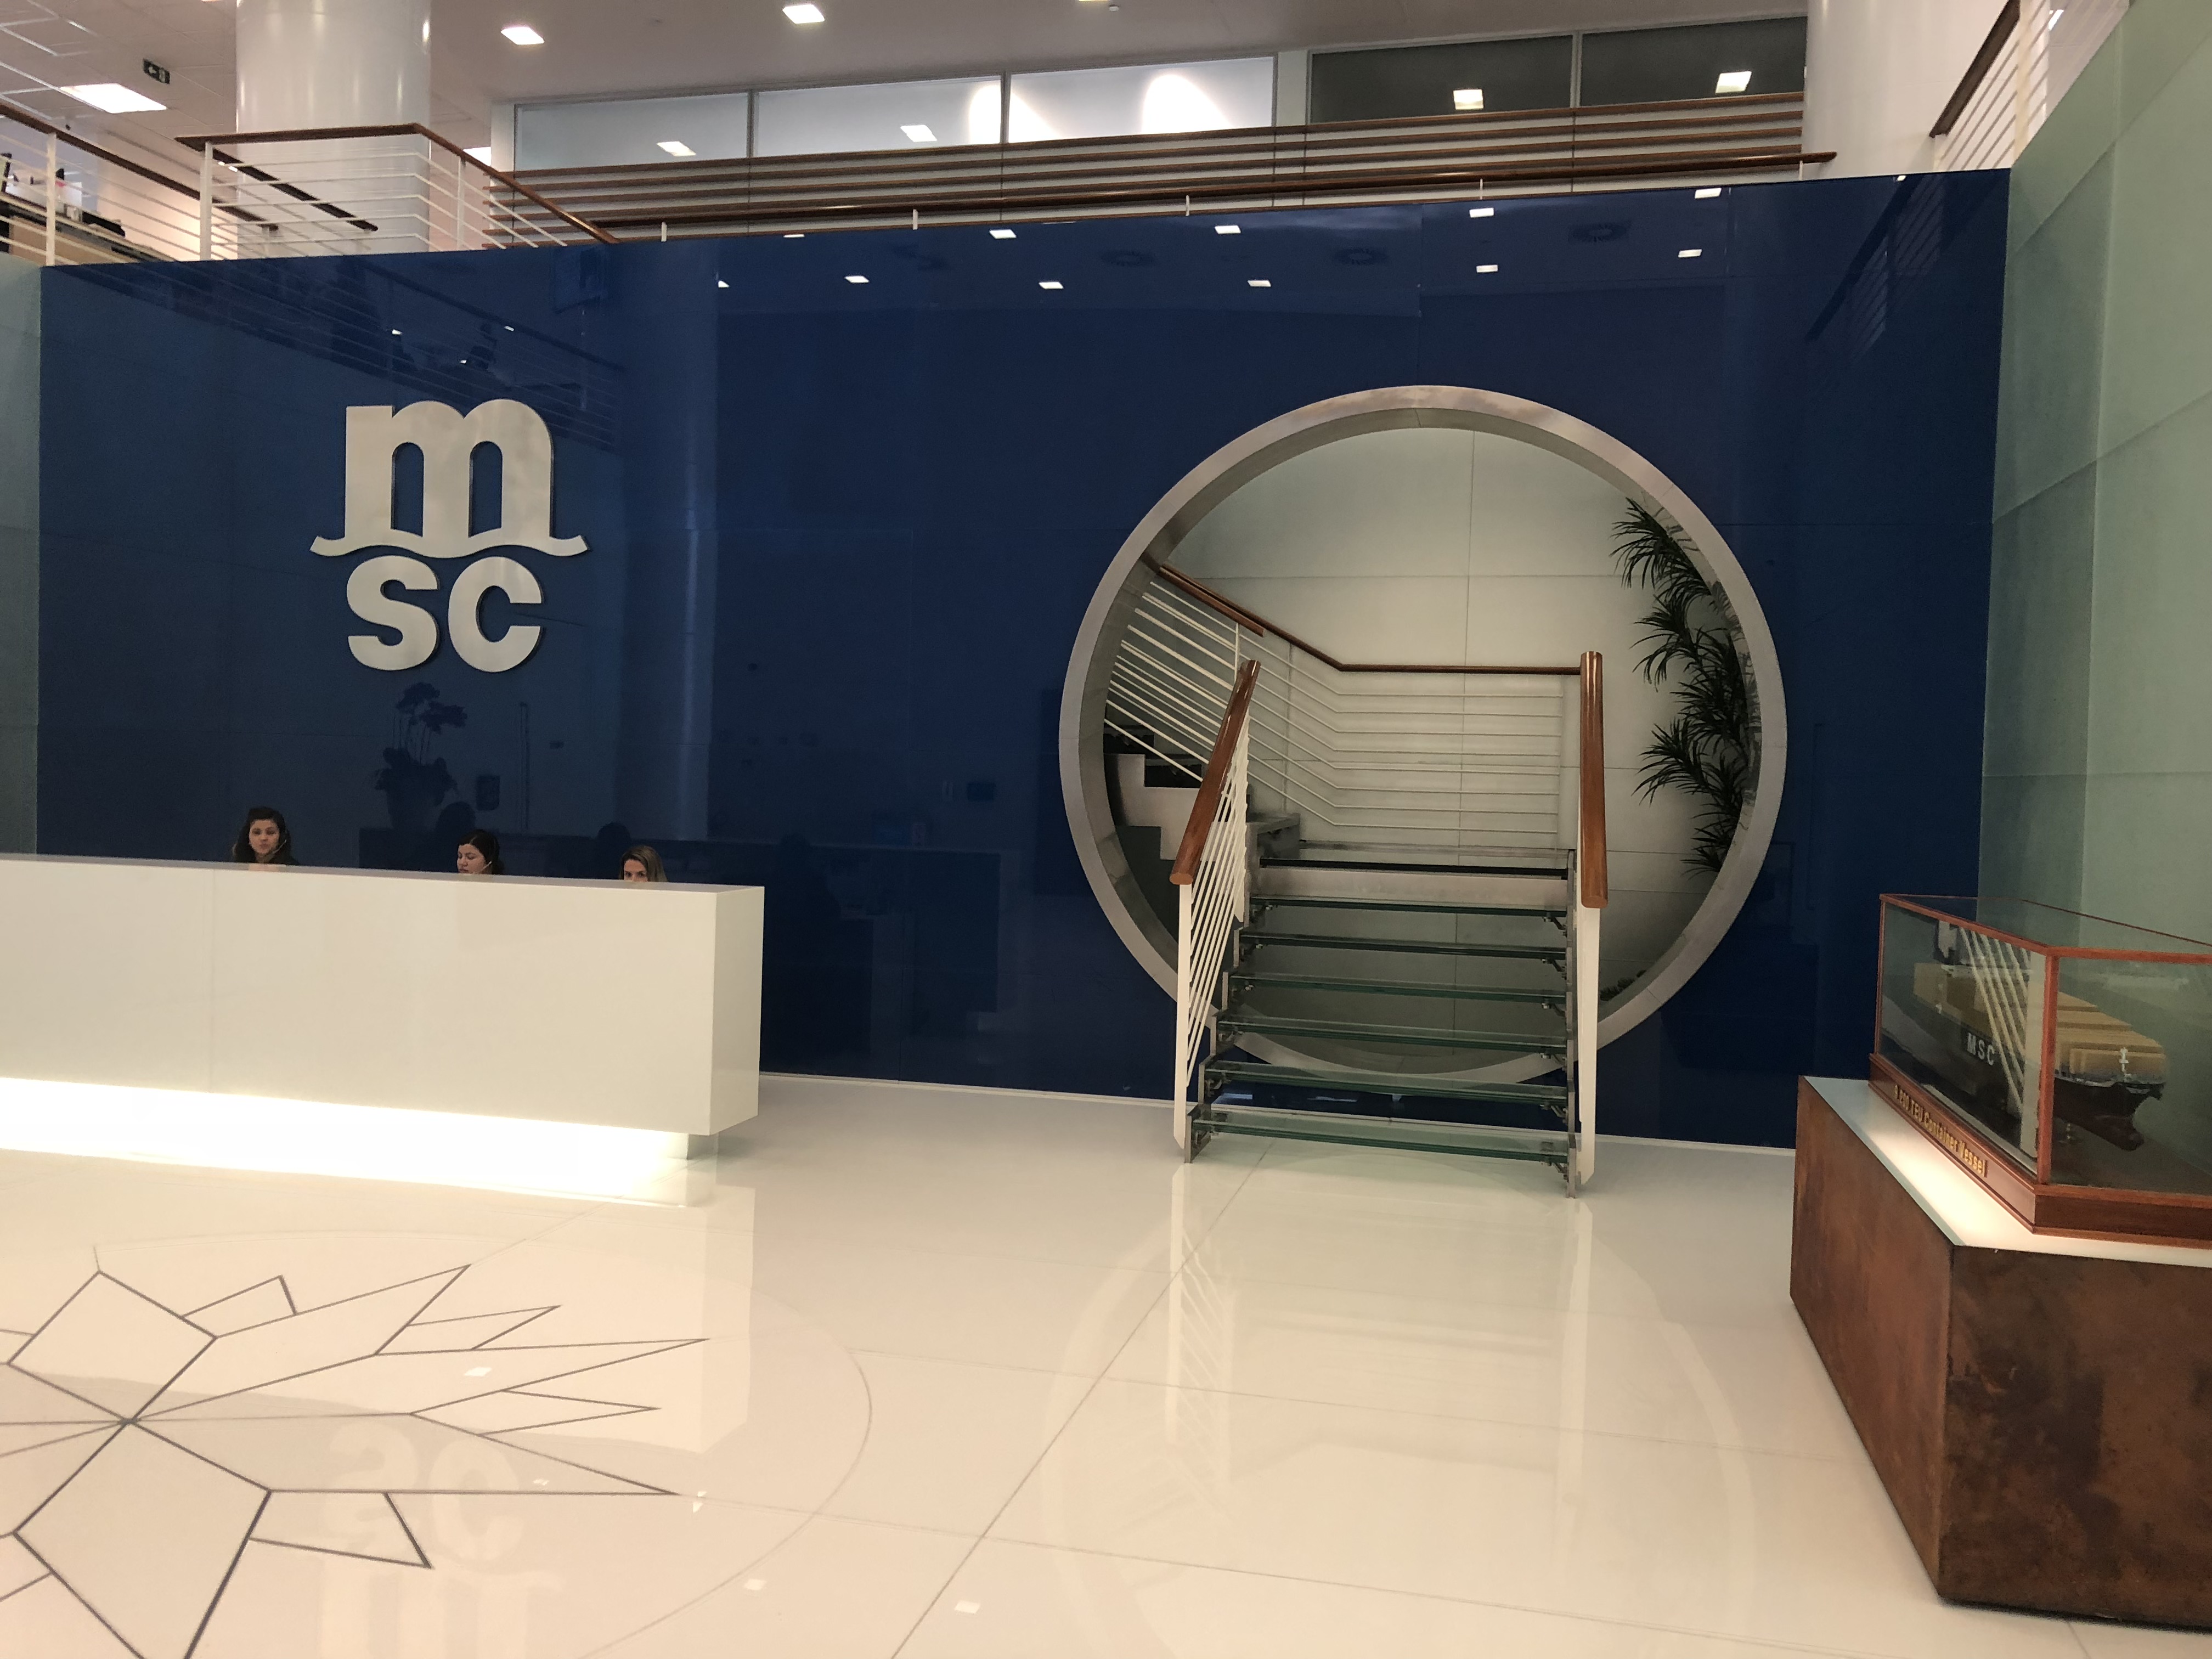 Partnership with MSC do Brazil is social projects in the City of Santos, State of São Paulo.